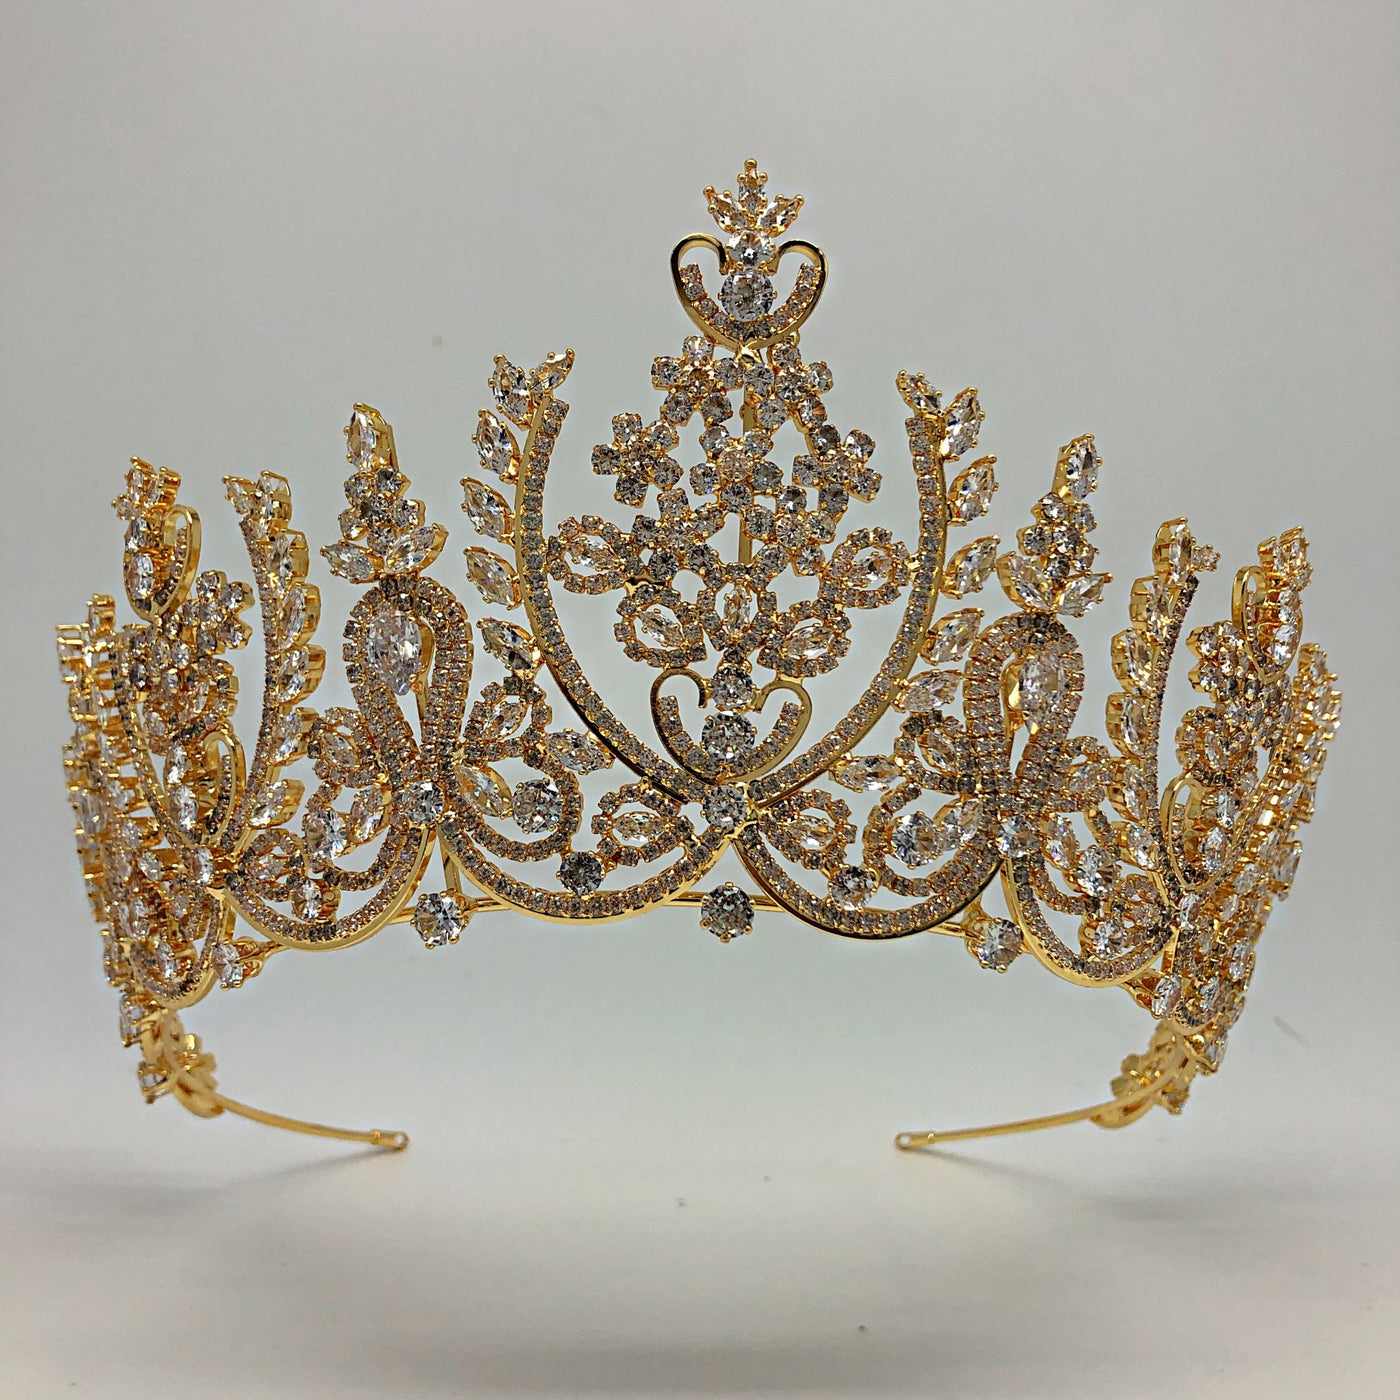 Gold Tall Tiara with unique Curves , Lines, Motifs & Style by Headband & Hair Accessories for Brides, Quince, Maid of Honor by Lucky Collections ™